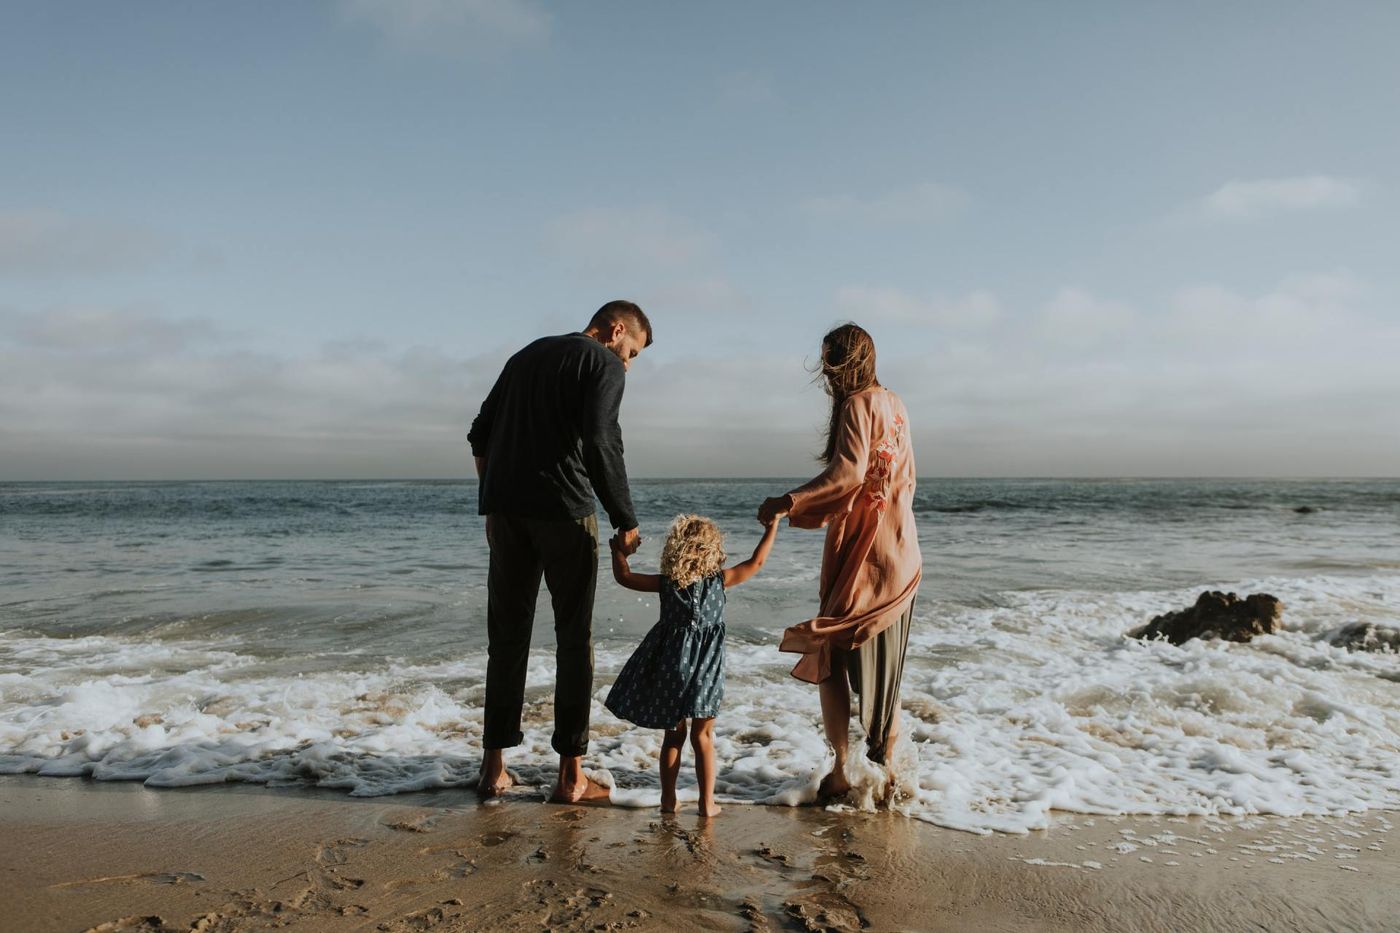 Man and women with child standing on the beach